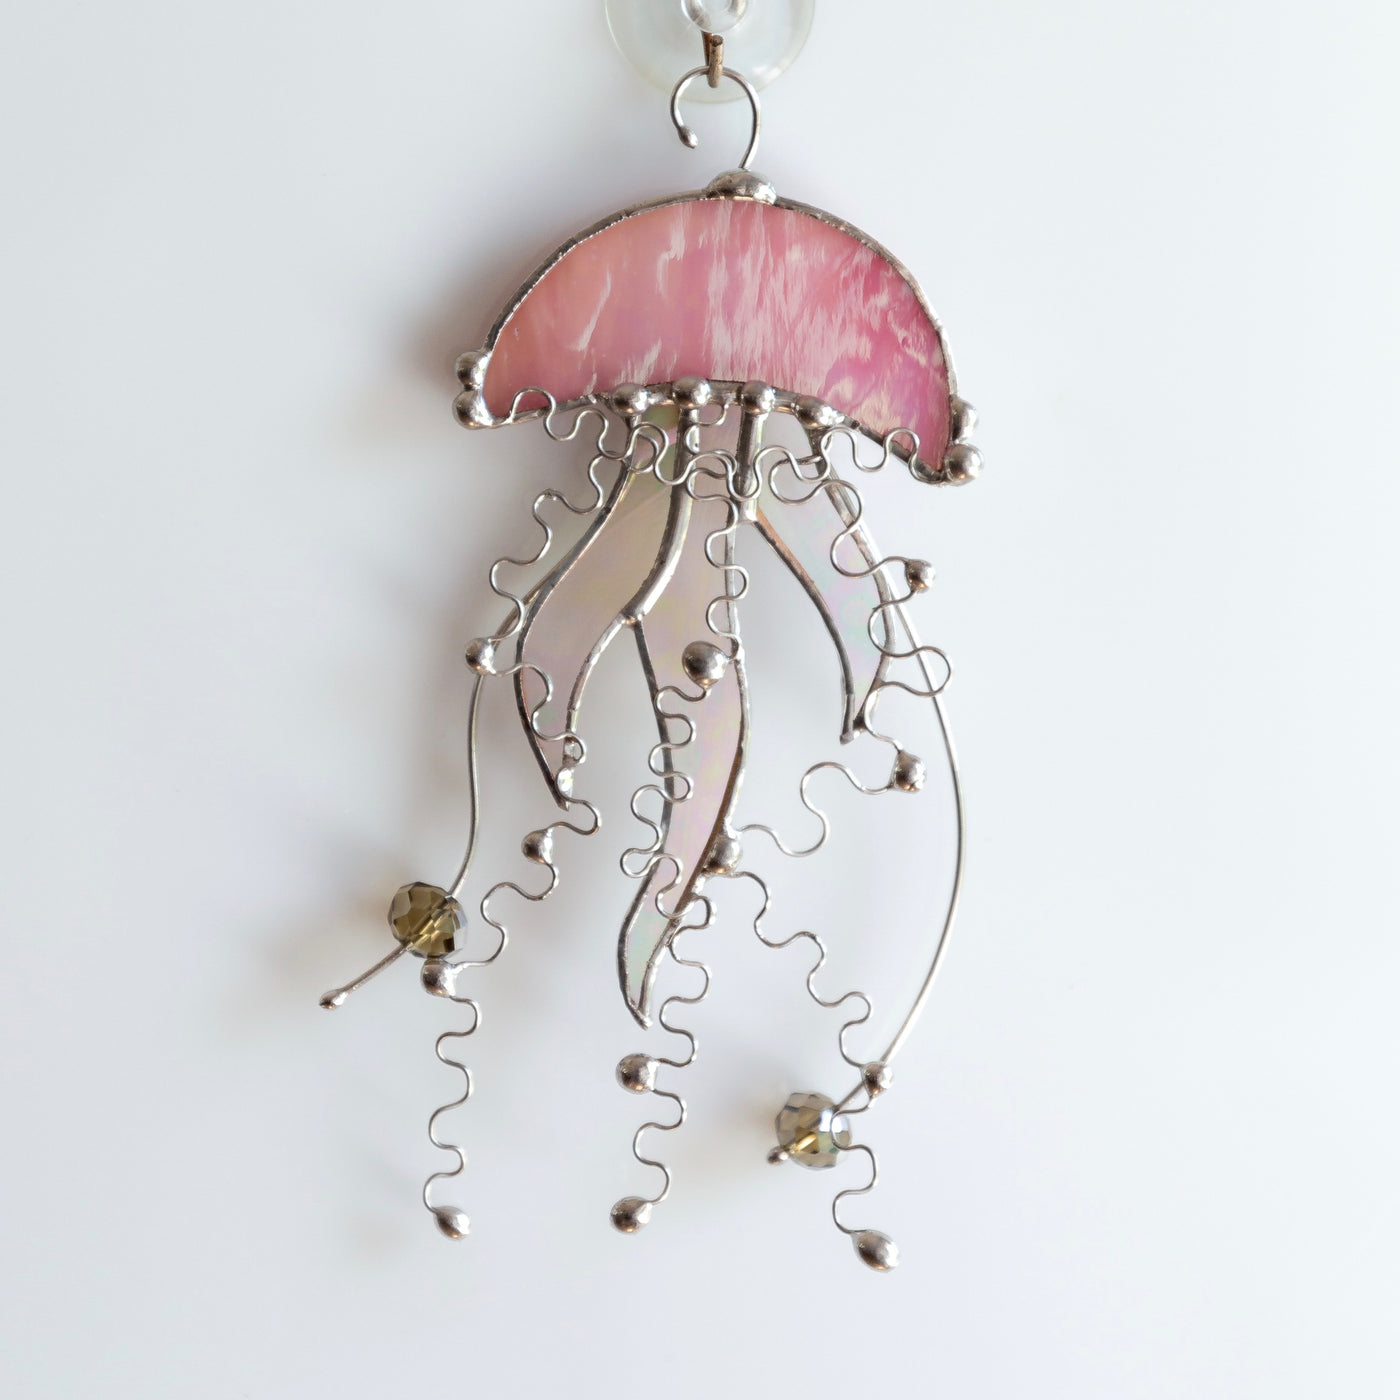 Stained glass pink jellyfish with iridescent tentacles suncatcher